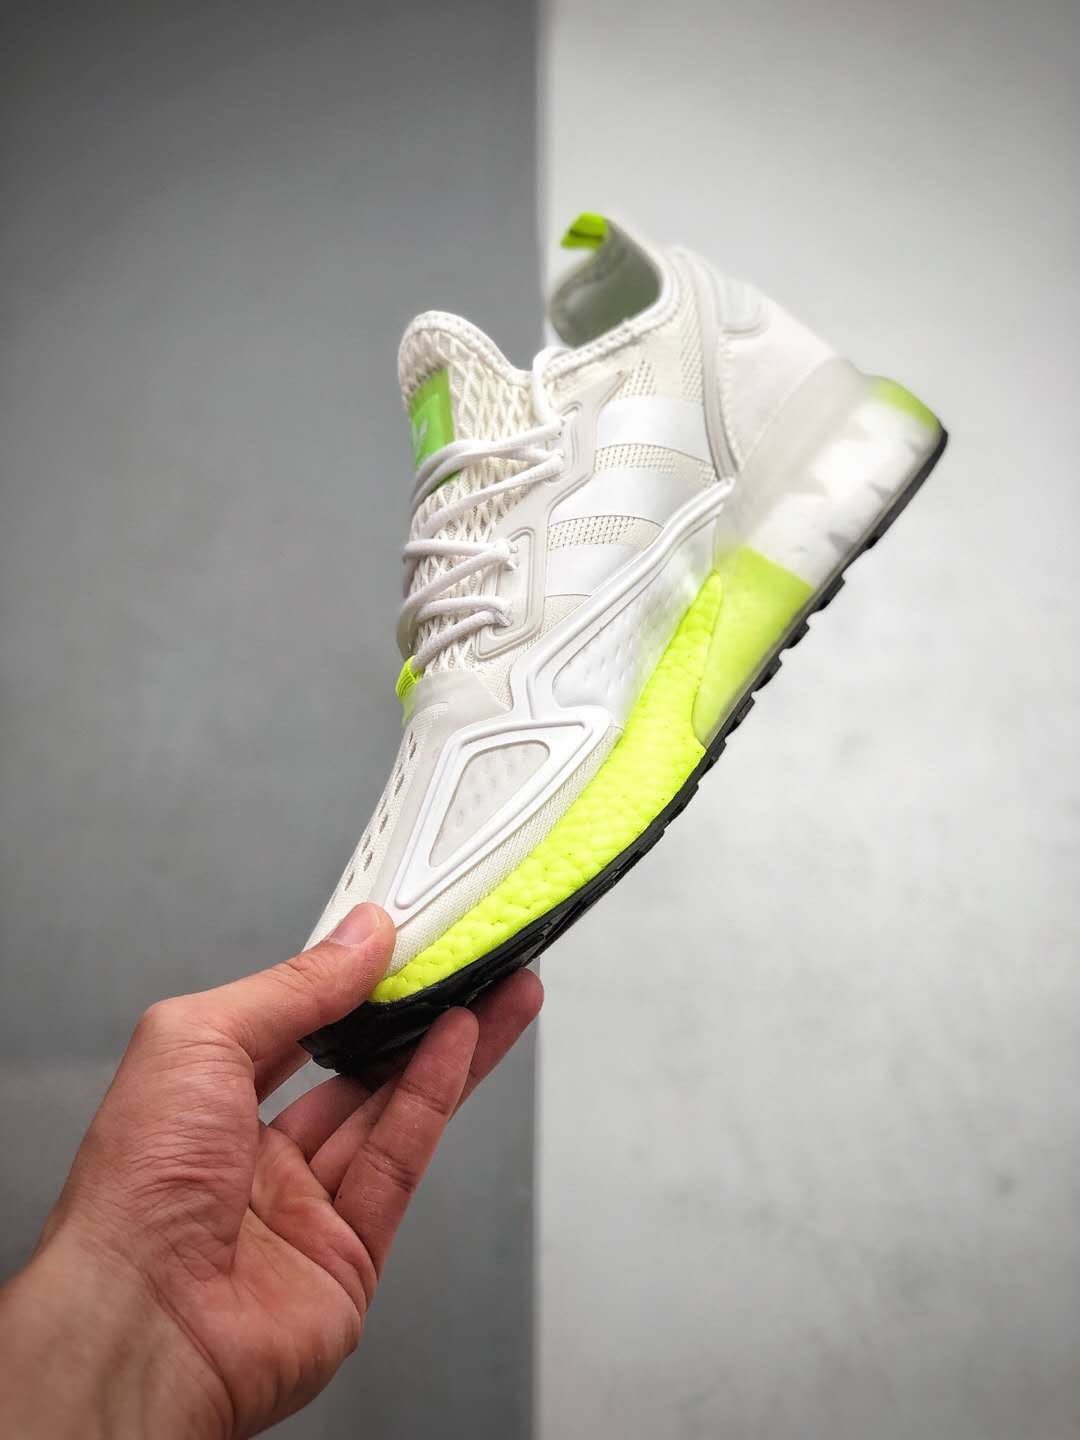 Adidas ZX 2K Boost White Solar Yellow FW0480 - Stylish and Comfortable Sneakers